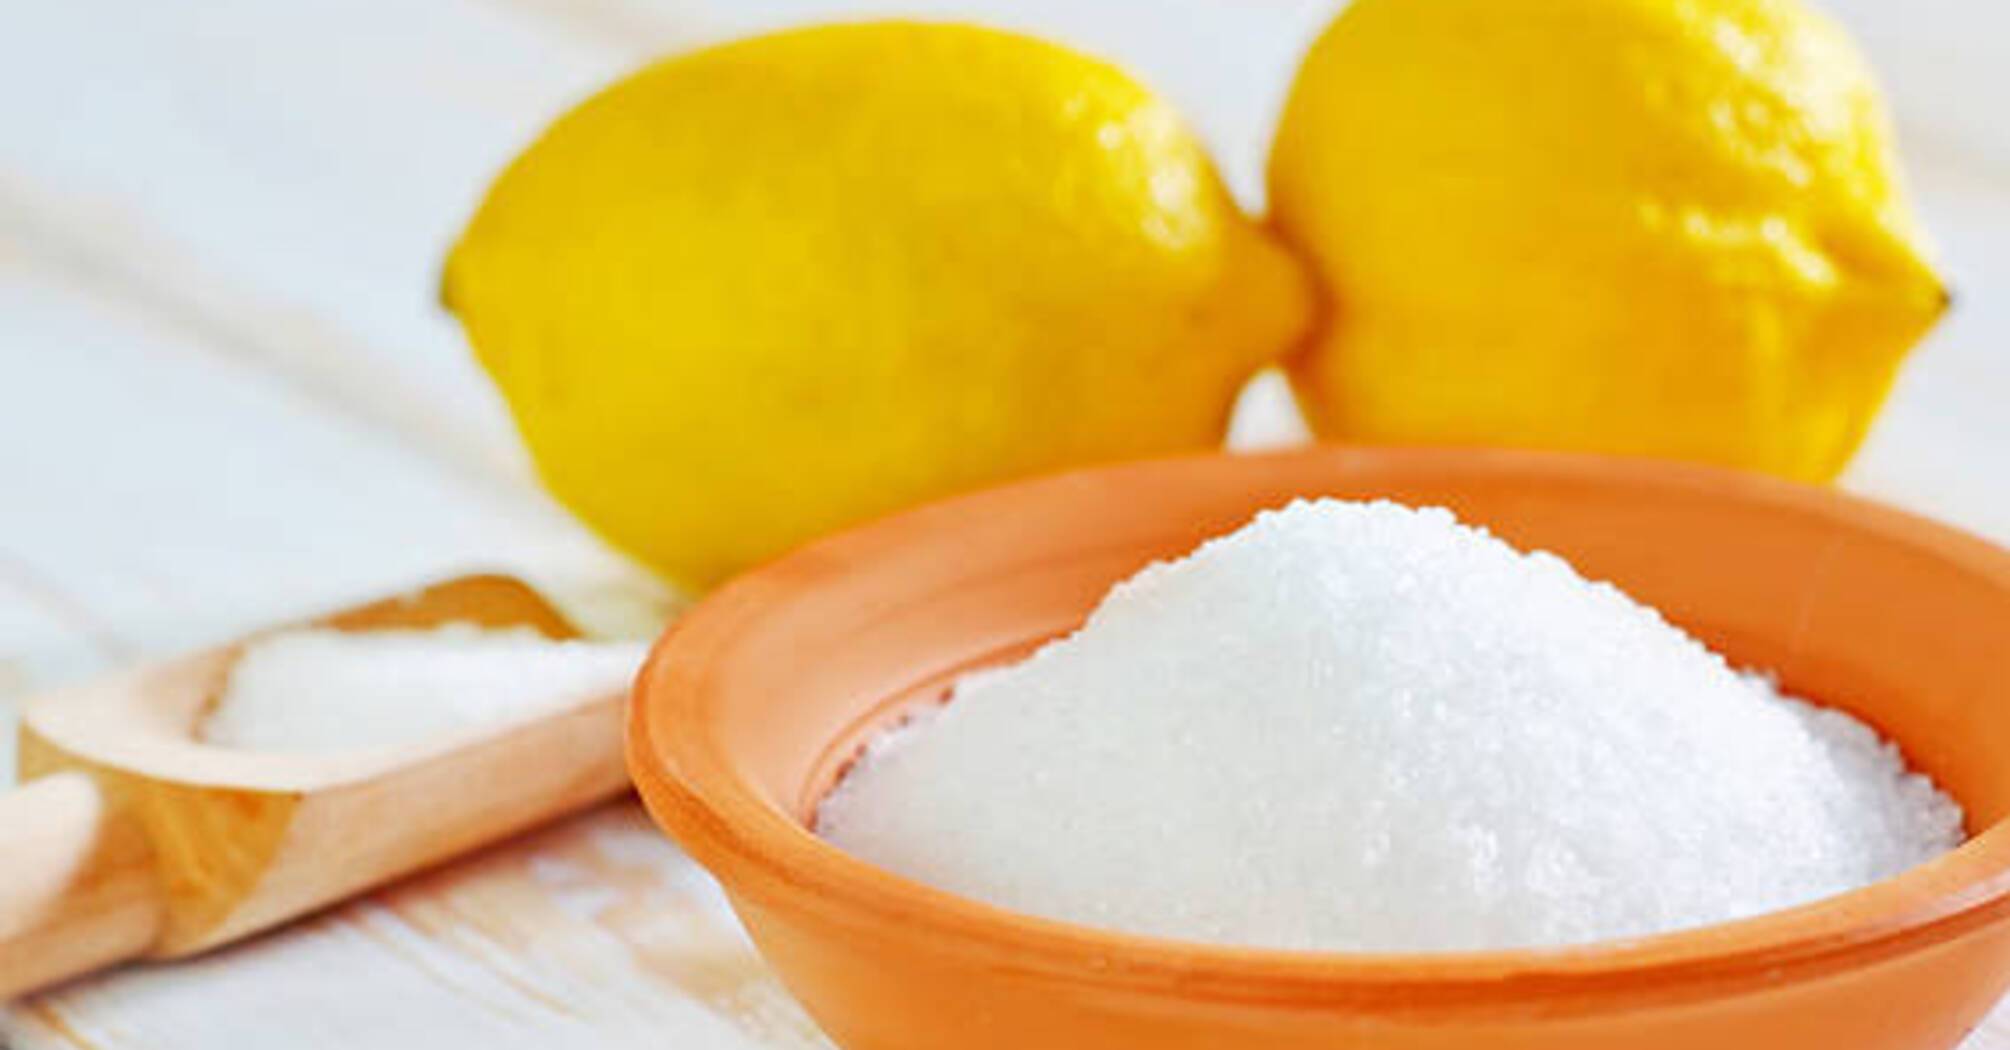 How to use citric acid in everyday life: 3 interesting life hacks